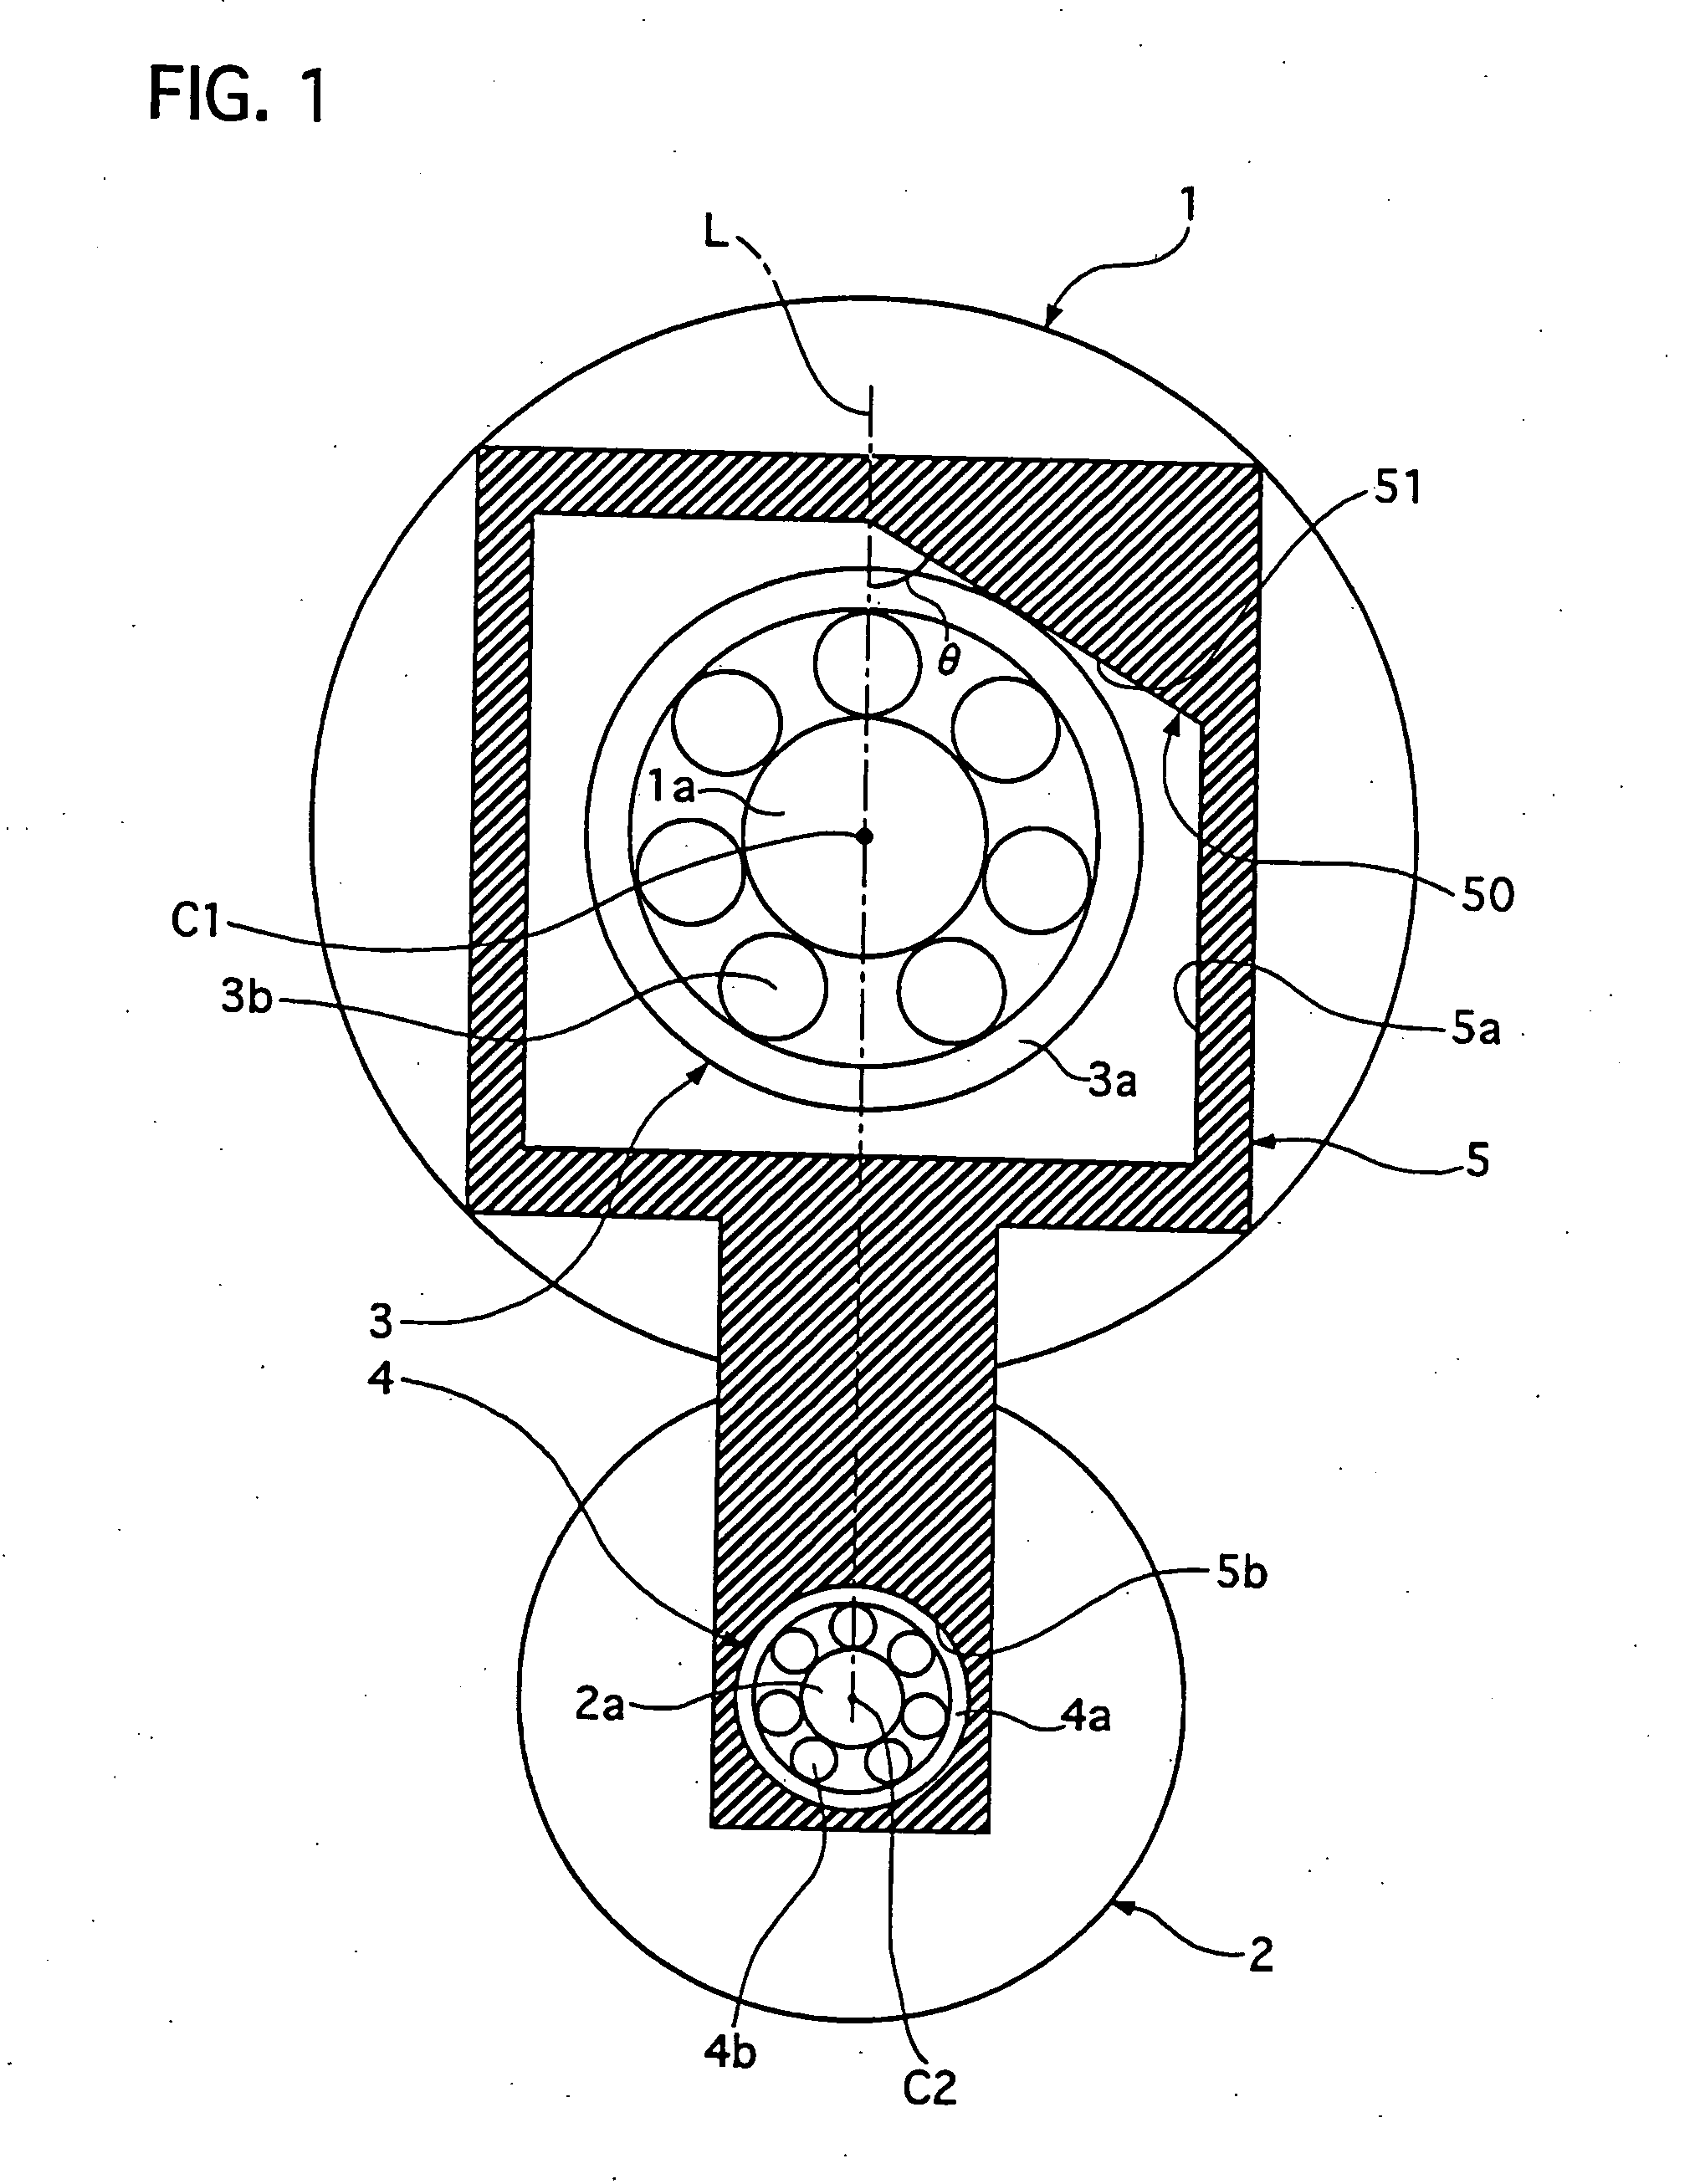 Friction drive device